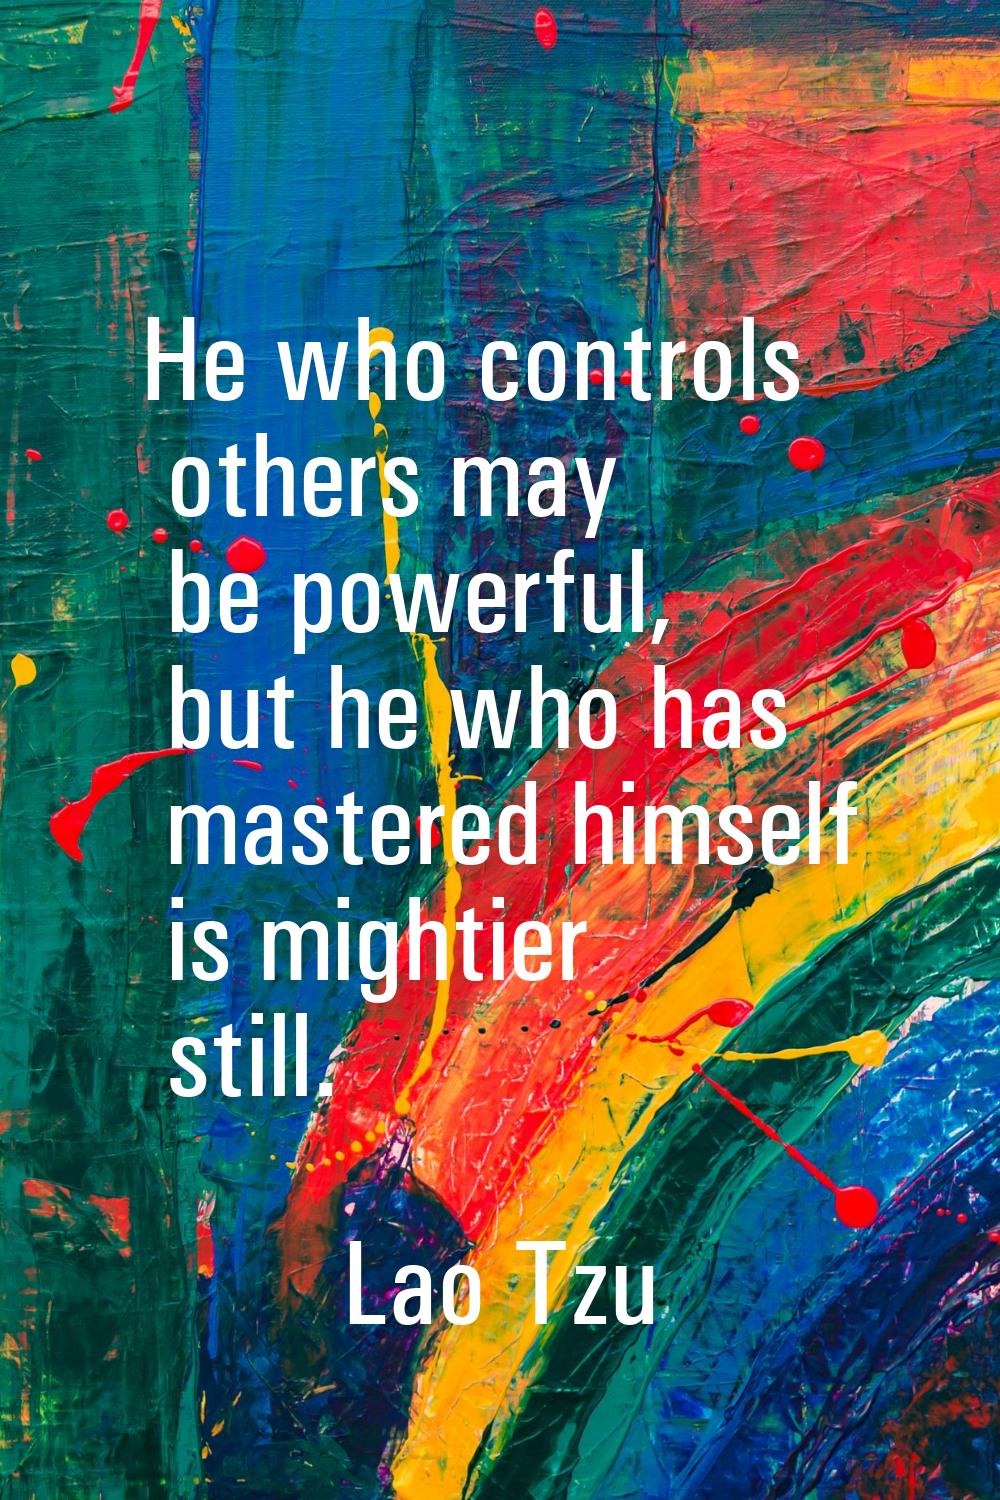 He who controls others may be powerful, but he who has mastered himself is mightier still.